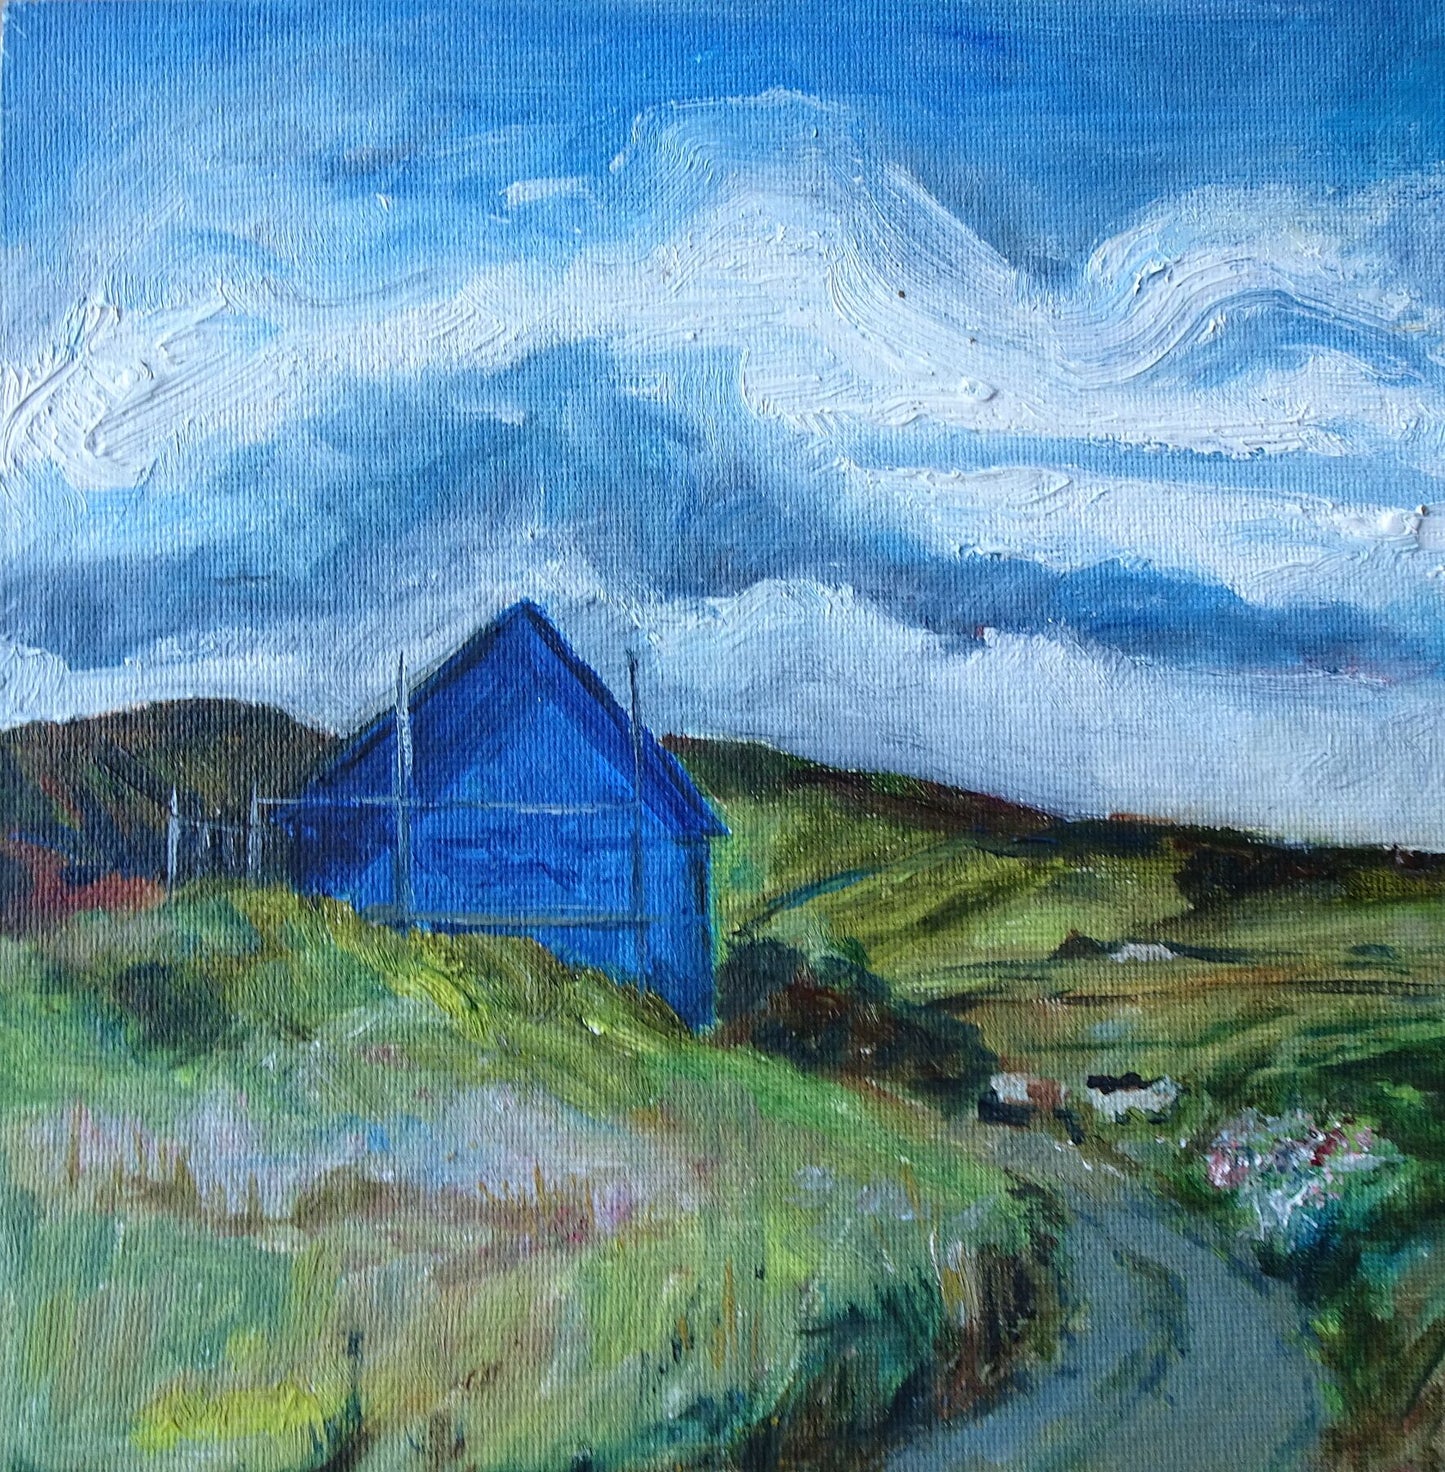 print of blue house and a road orkney scotland or anywhere by Jeanne Bouza Rose